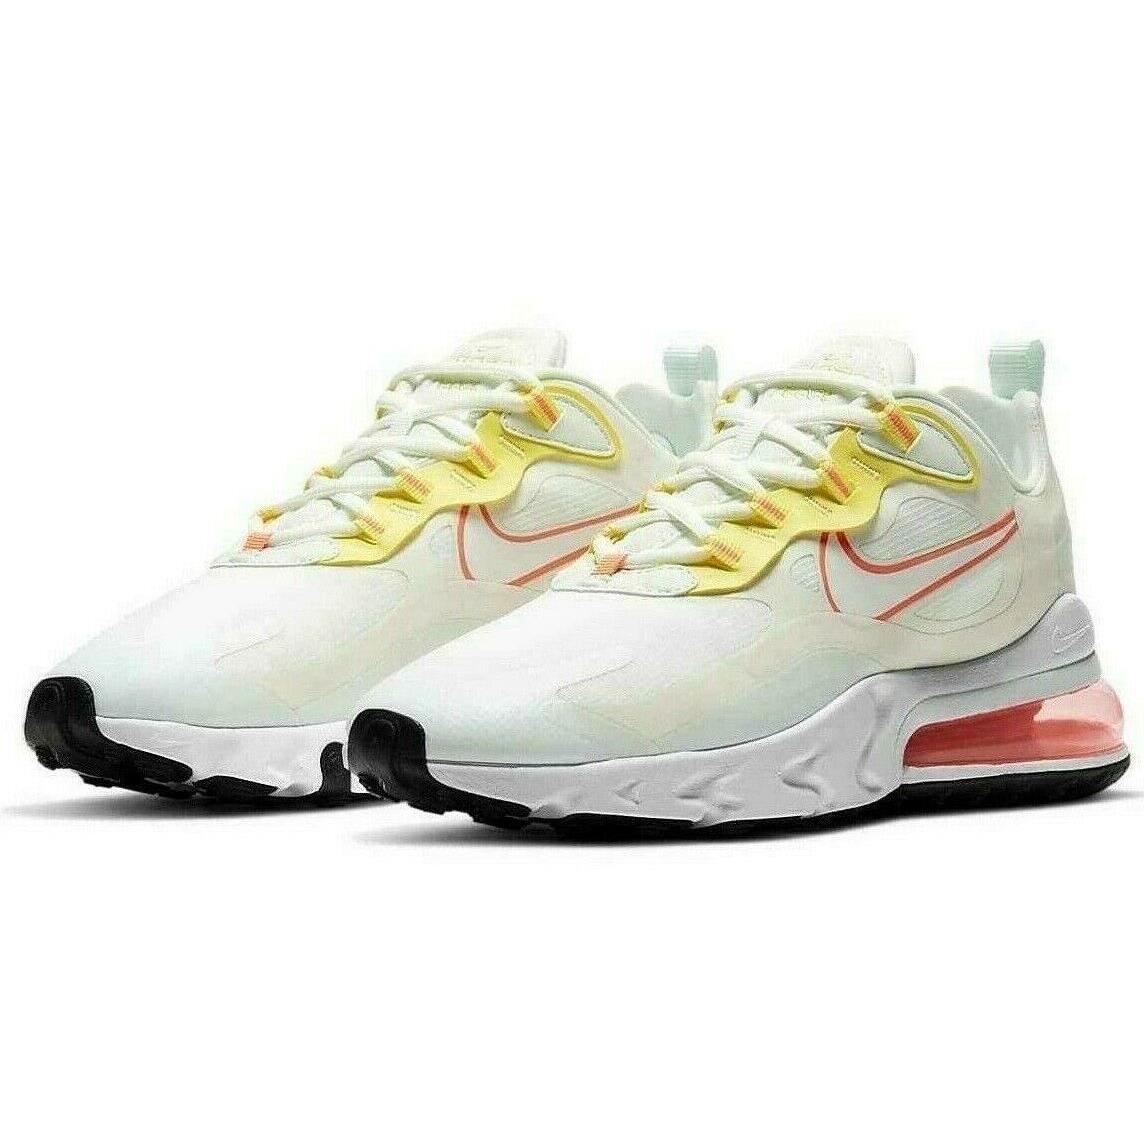 Nike Air Max 270 React Womens Size 6.5 Sneaker Shoes CV8818 102 Pale Ivory